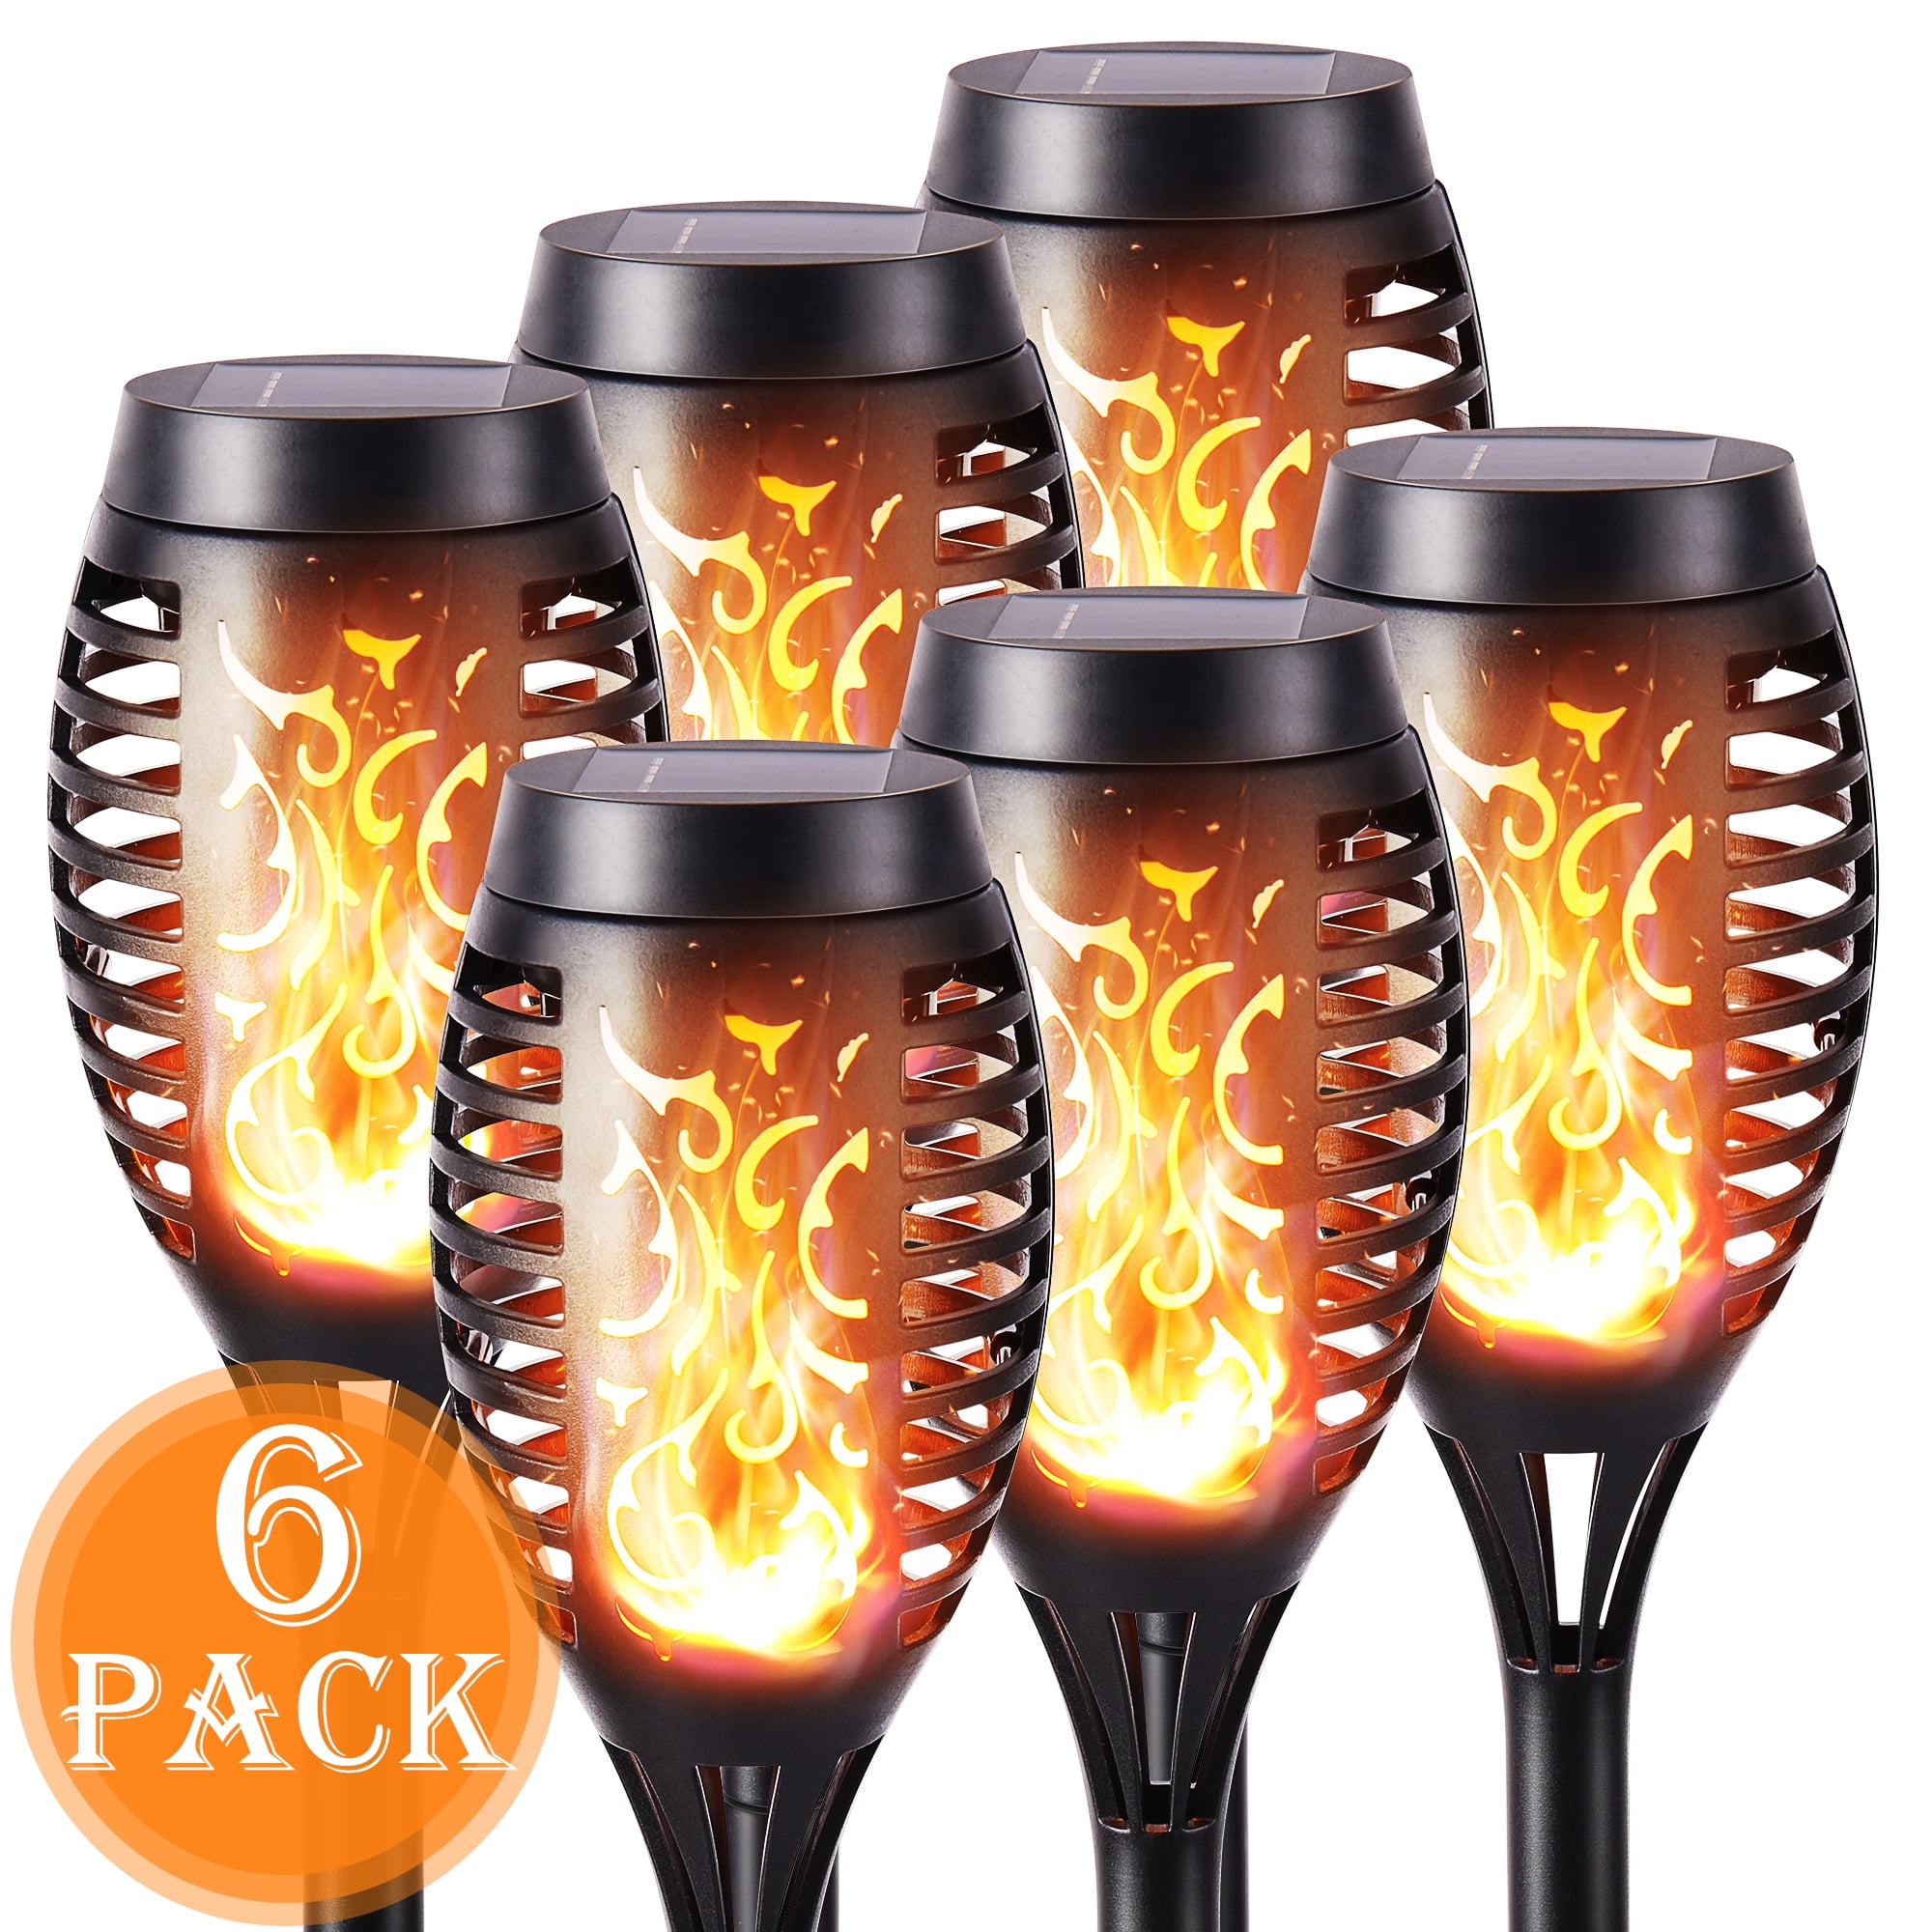 Toodour Solar Lights Outdoor with Flickering Flame, 6 Pack Solar Torch Lights Waterproof Solar Pathway Lights for Garden, Lawn Decor - Walmart.com